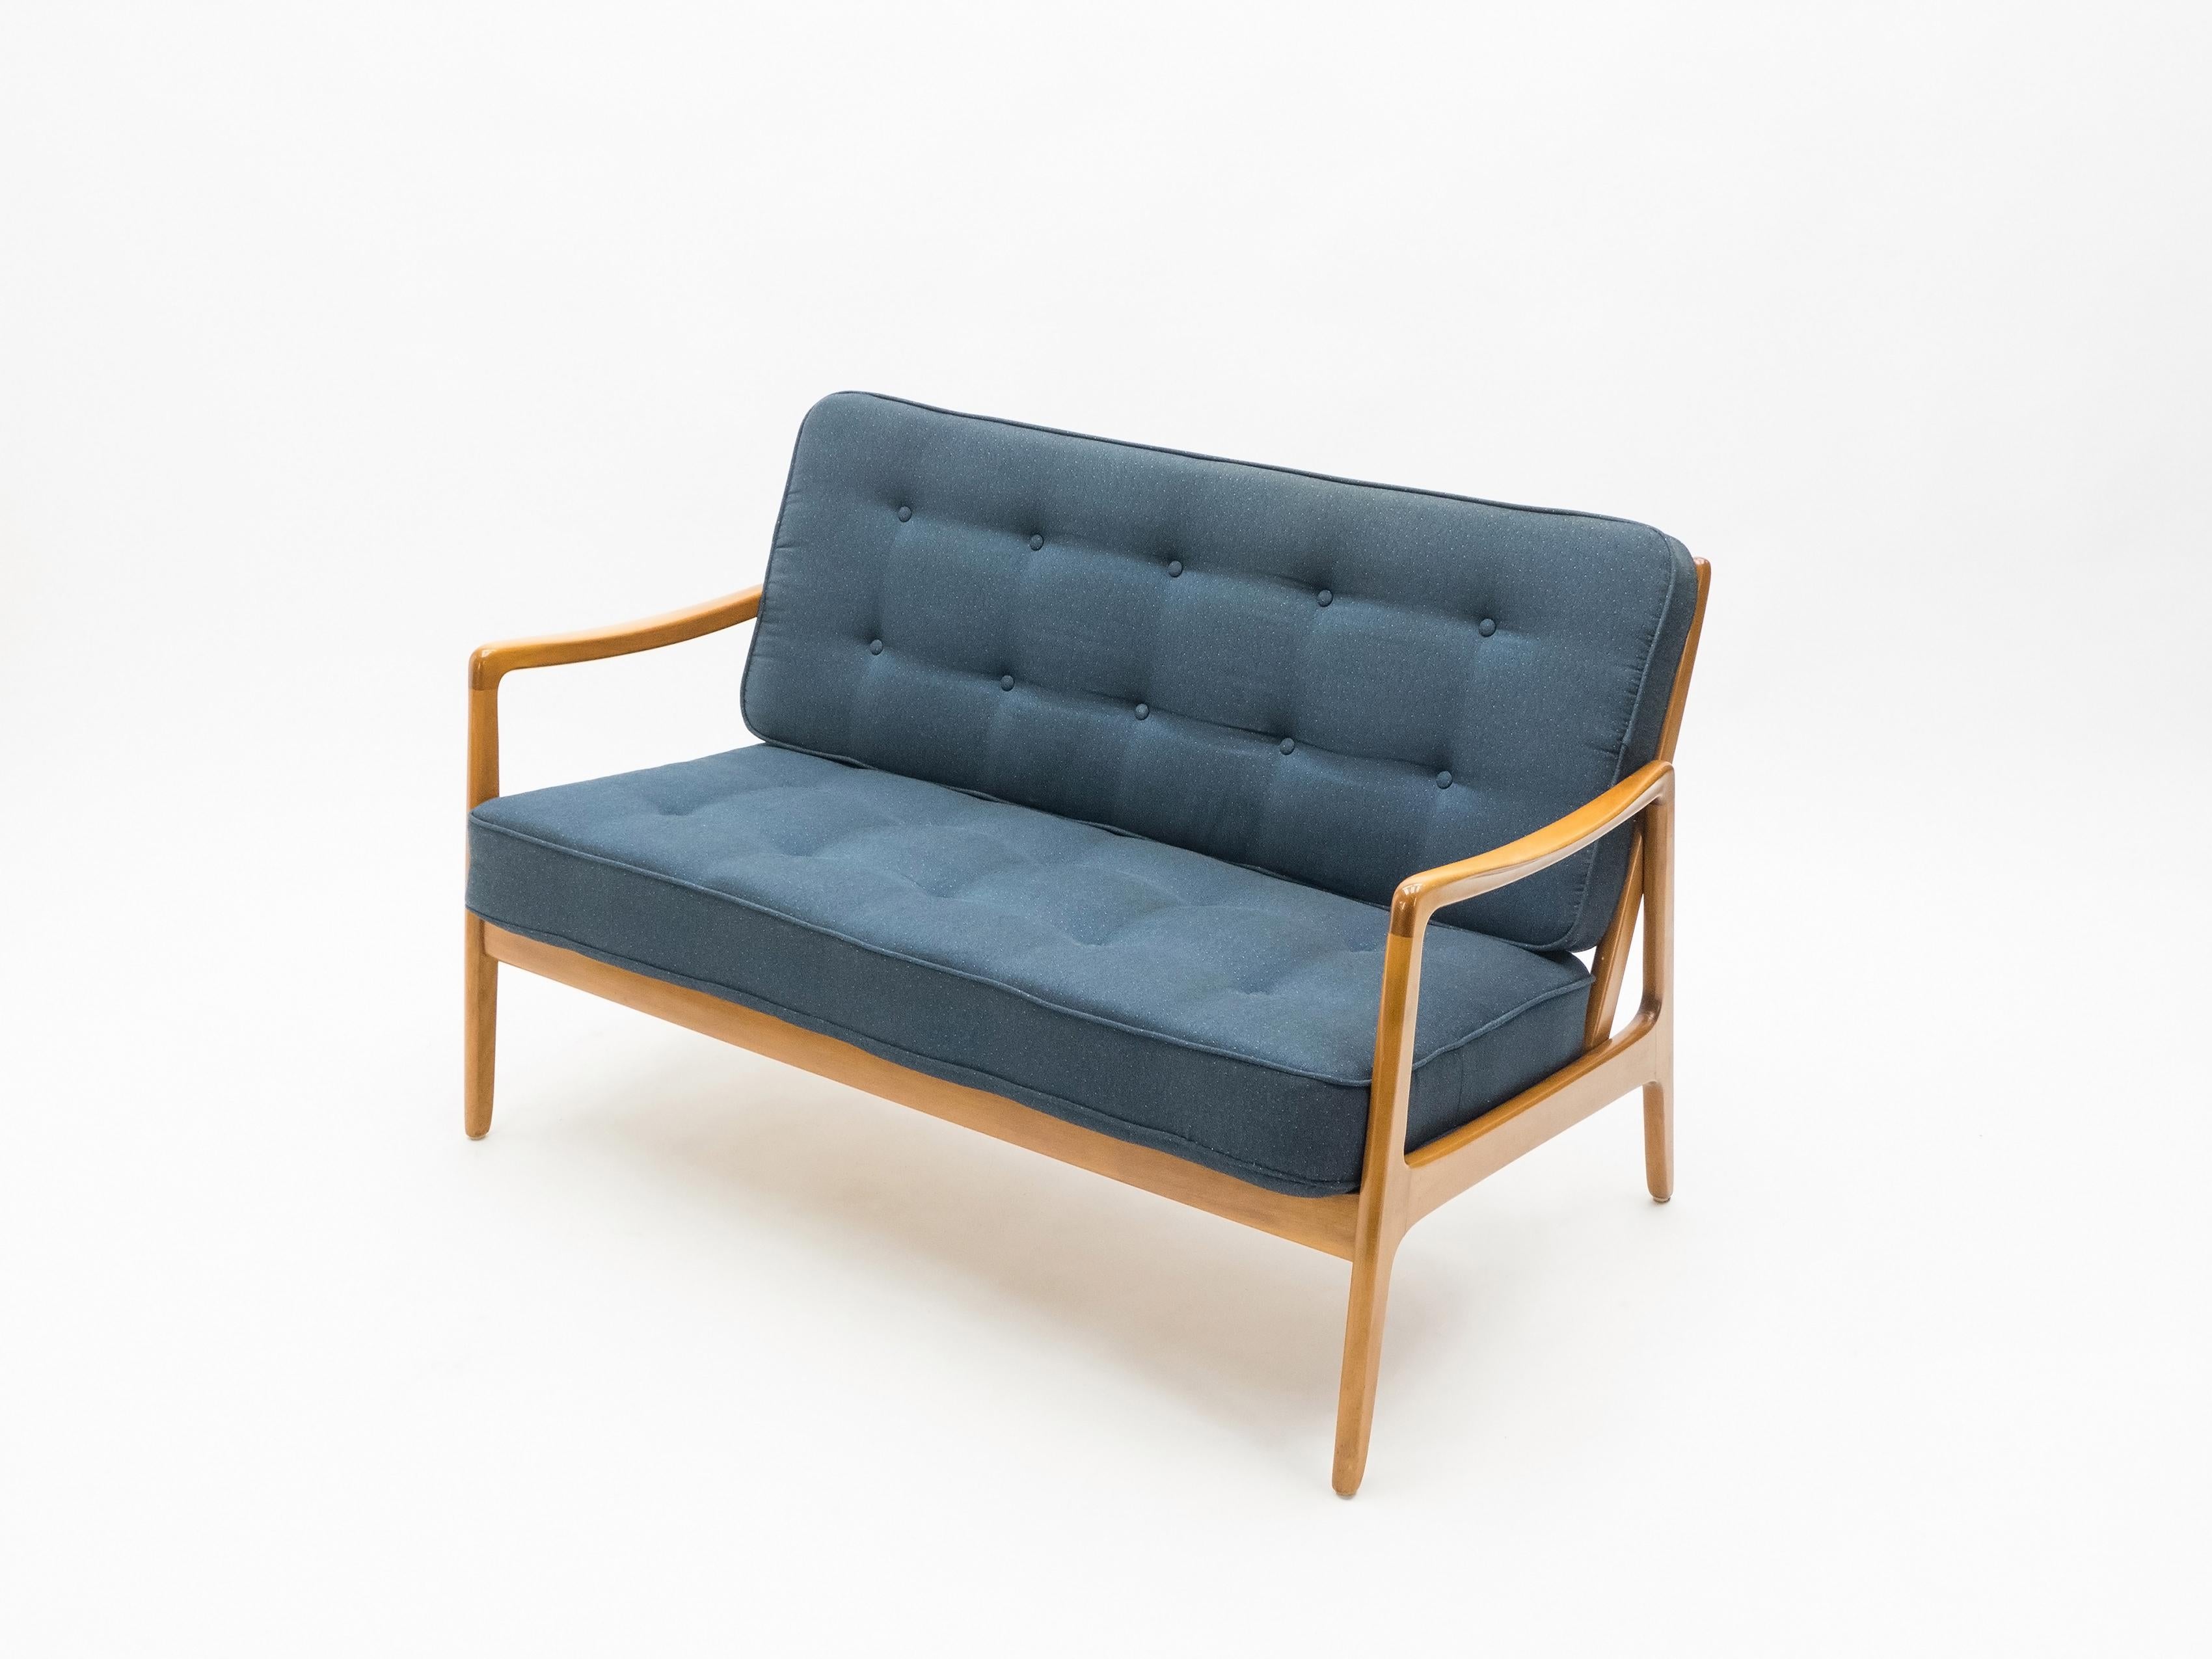 Renowned Danish designer Ole Wanscher is credited for being influential during the height of the acclaimed Scandinavian design movement that took place during the midcentury. His FD 109 sofa, designed during the 1960s for respected Danish